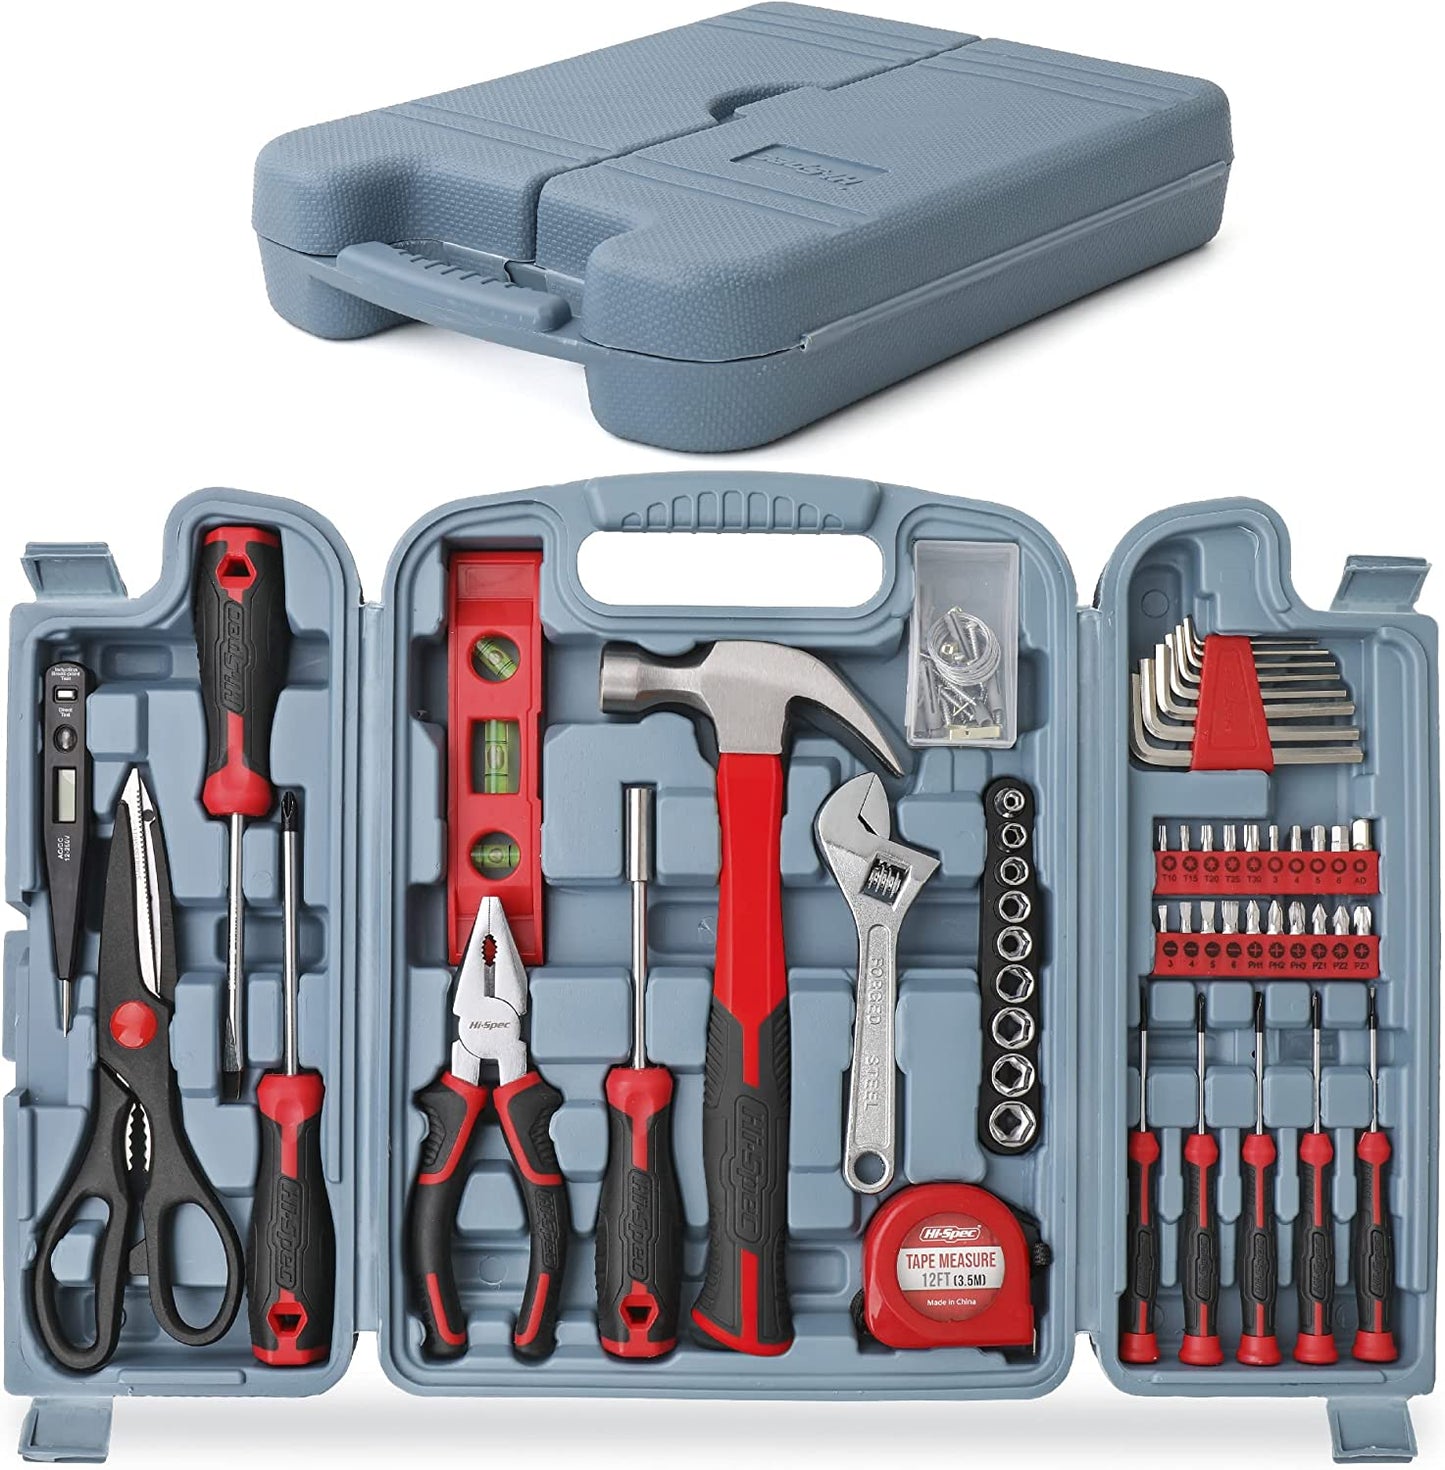 54 Piece Red Home & Office Tool Kit Set. General DIY Repair & Maintenance Hand Tools with Hammer, Pliers, Screwdriver & Hex Key Sets. Complete in a Storage Box Carry Case